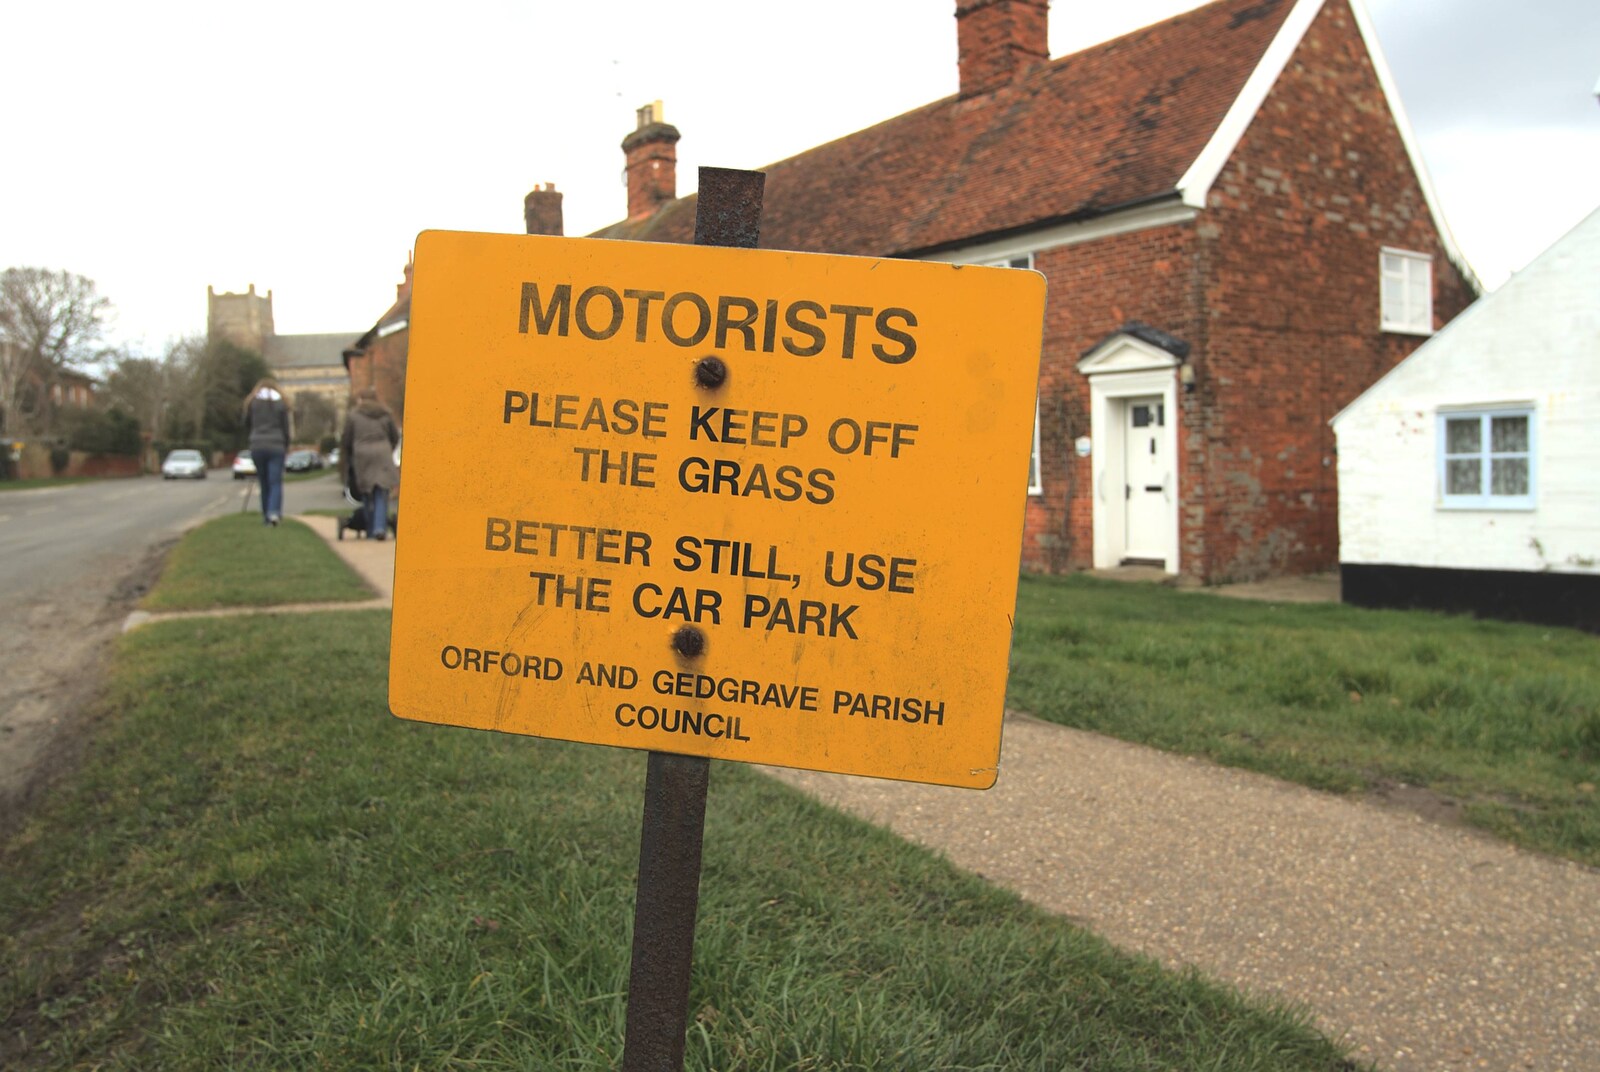 The sign tells it straight from A Trip to Orford Castle, Suffolk - 14th March 2009